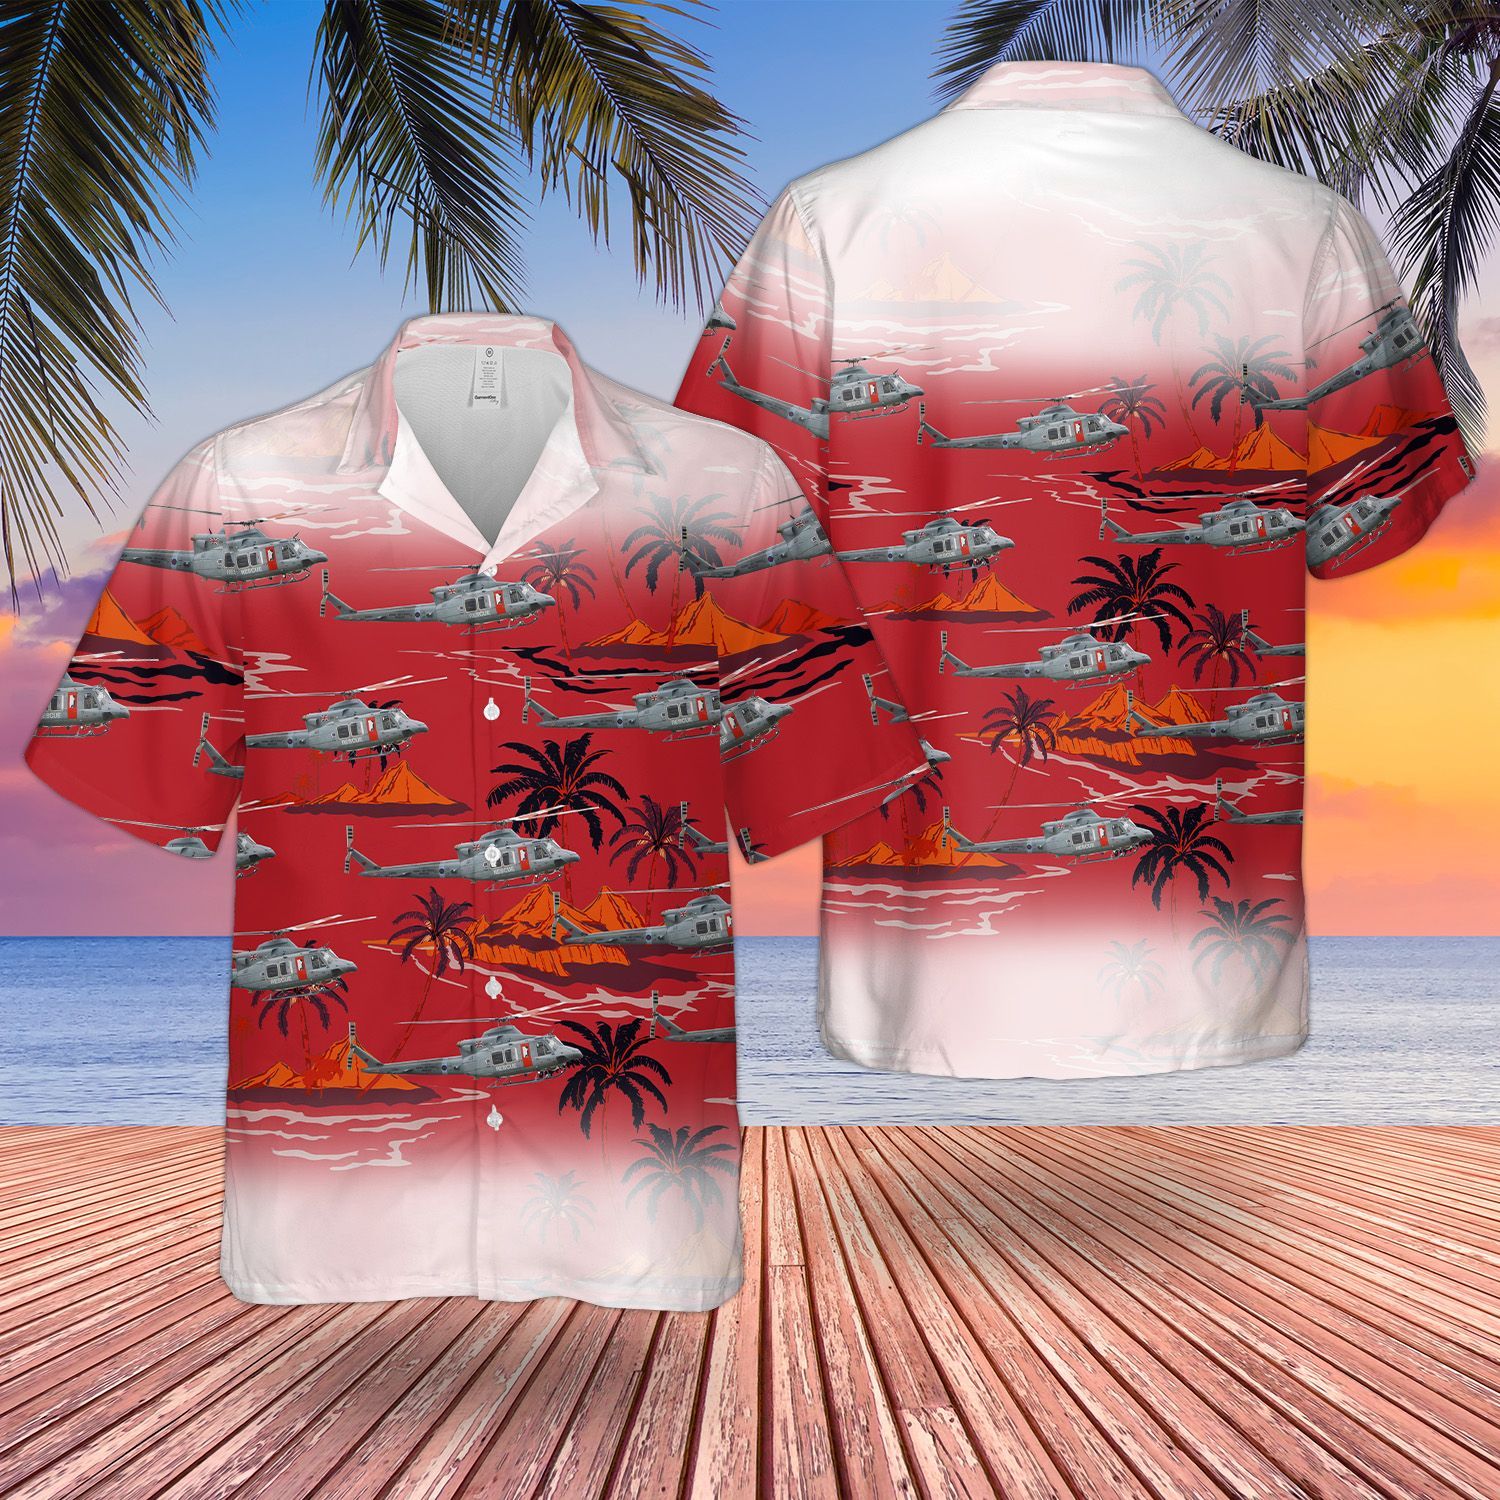 HOT RAF Bell Griffin HAR2 Red All Over Print Tropical Shirt2